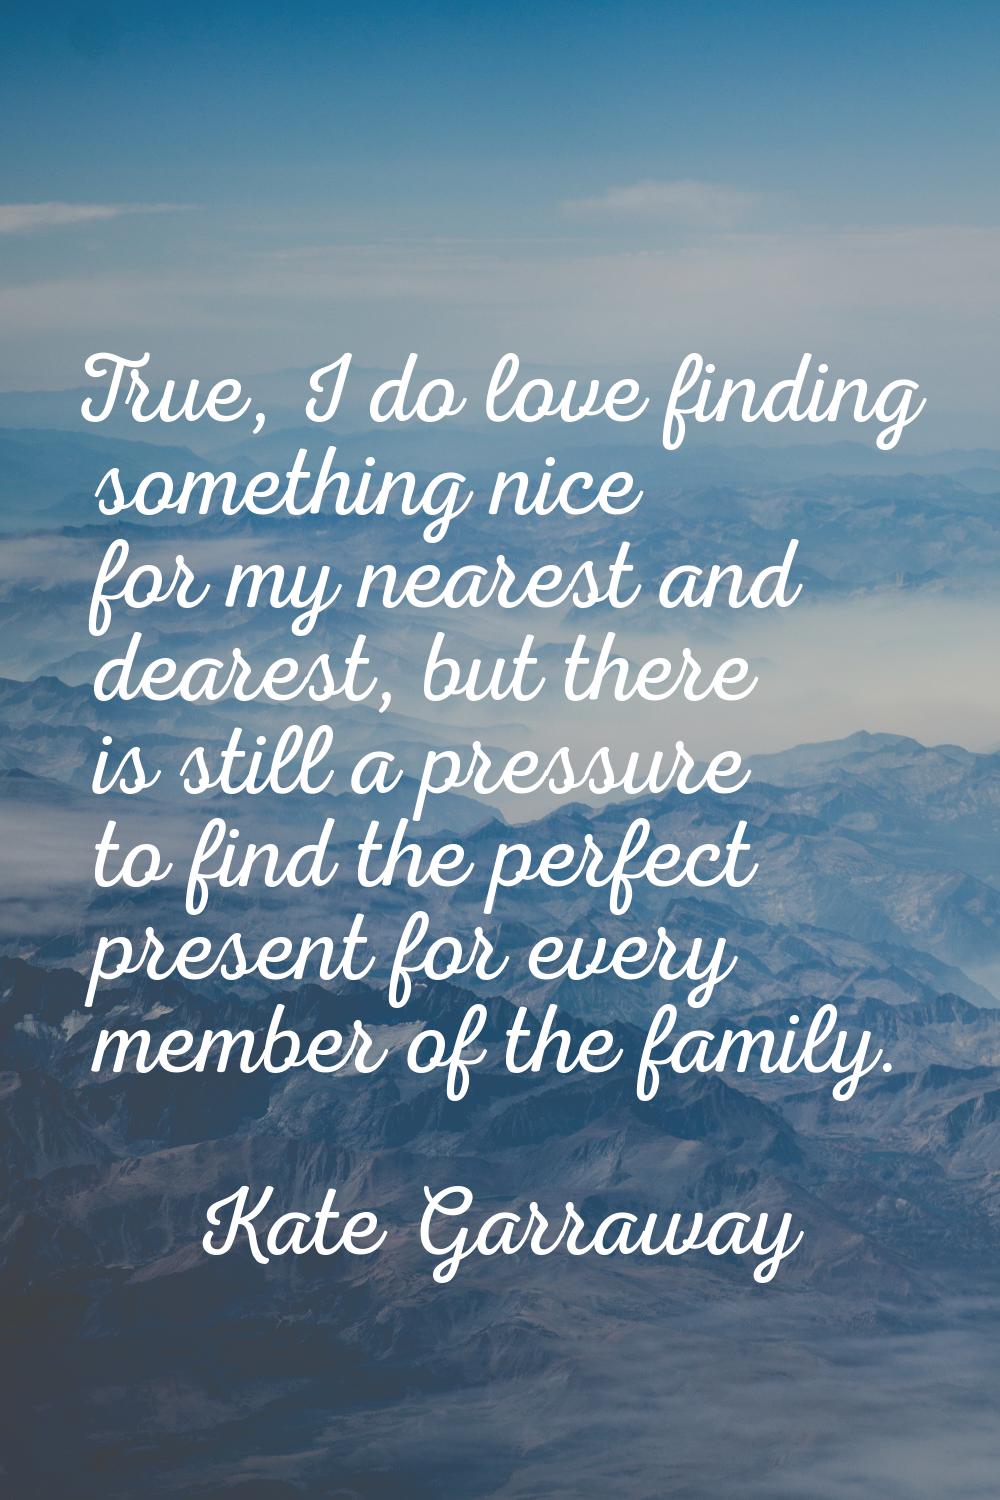 True, I do love finding something nice for my nearest and dearest, but there is still a pressure to